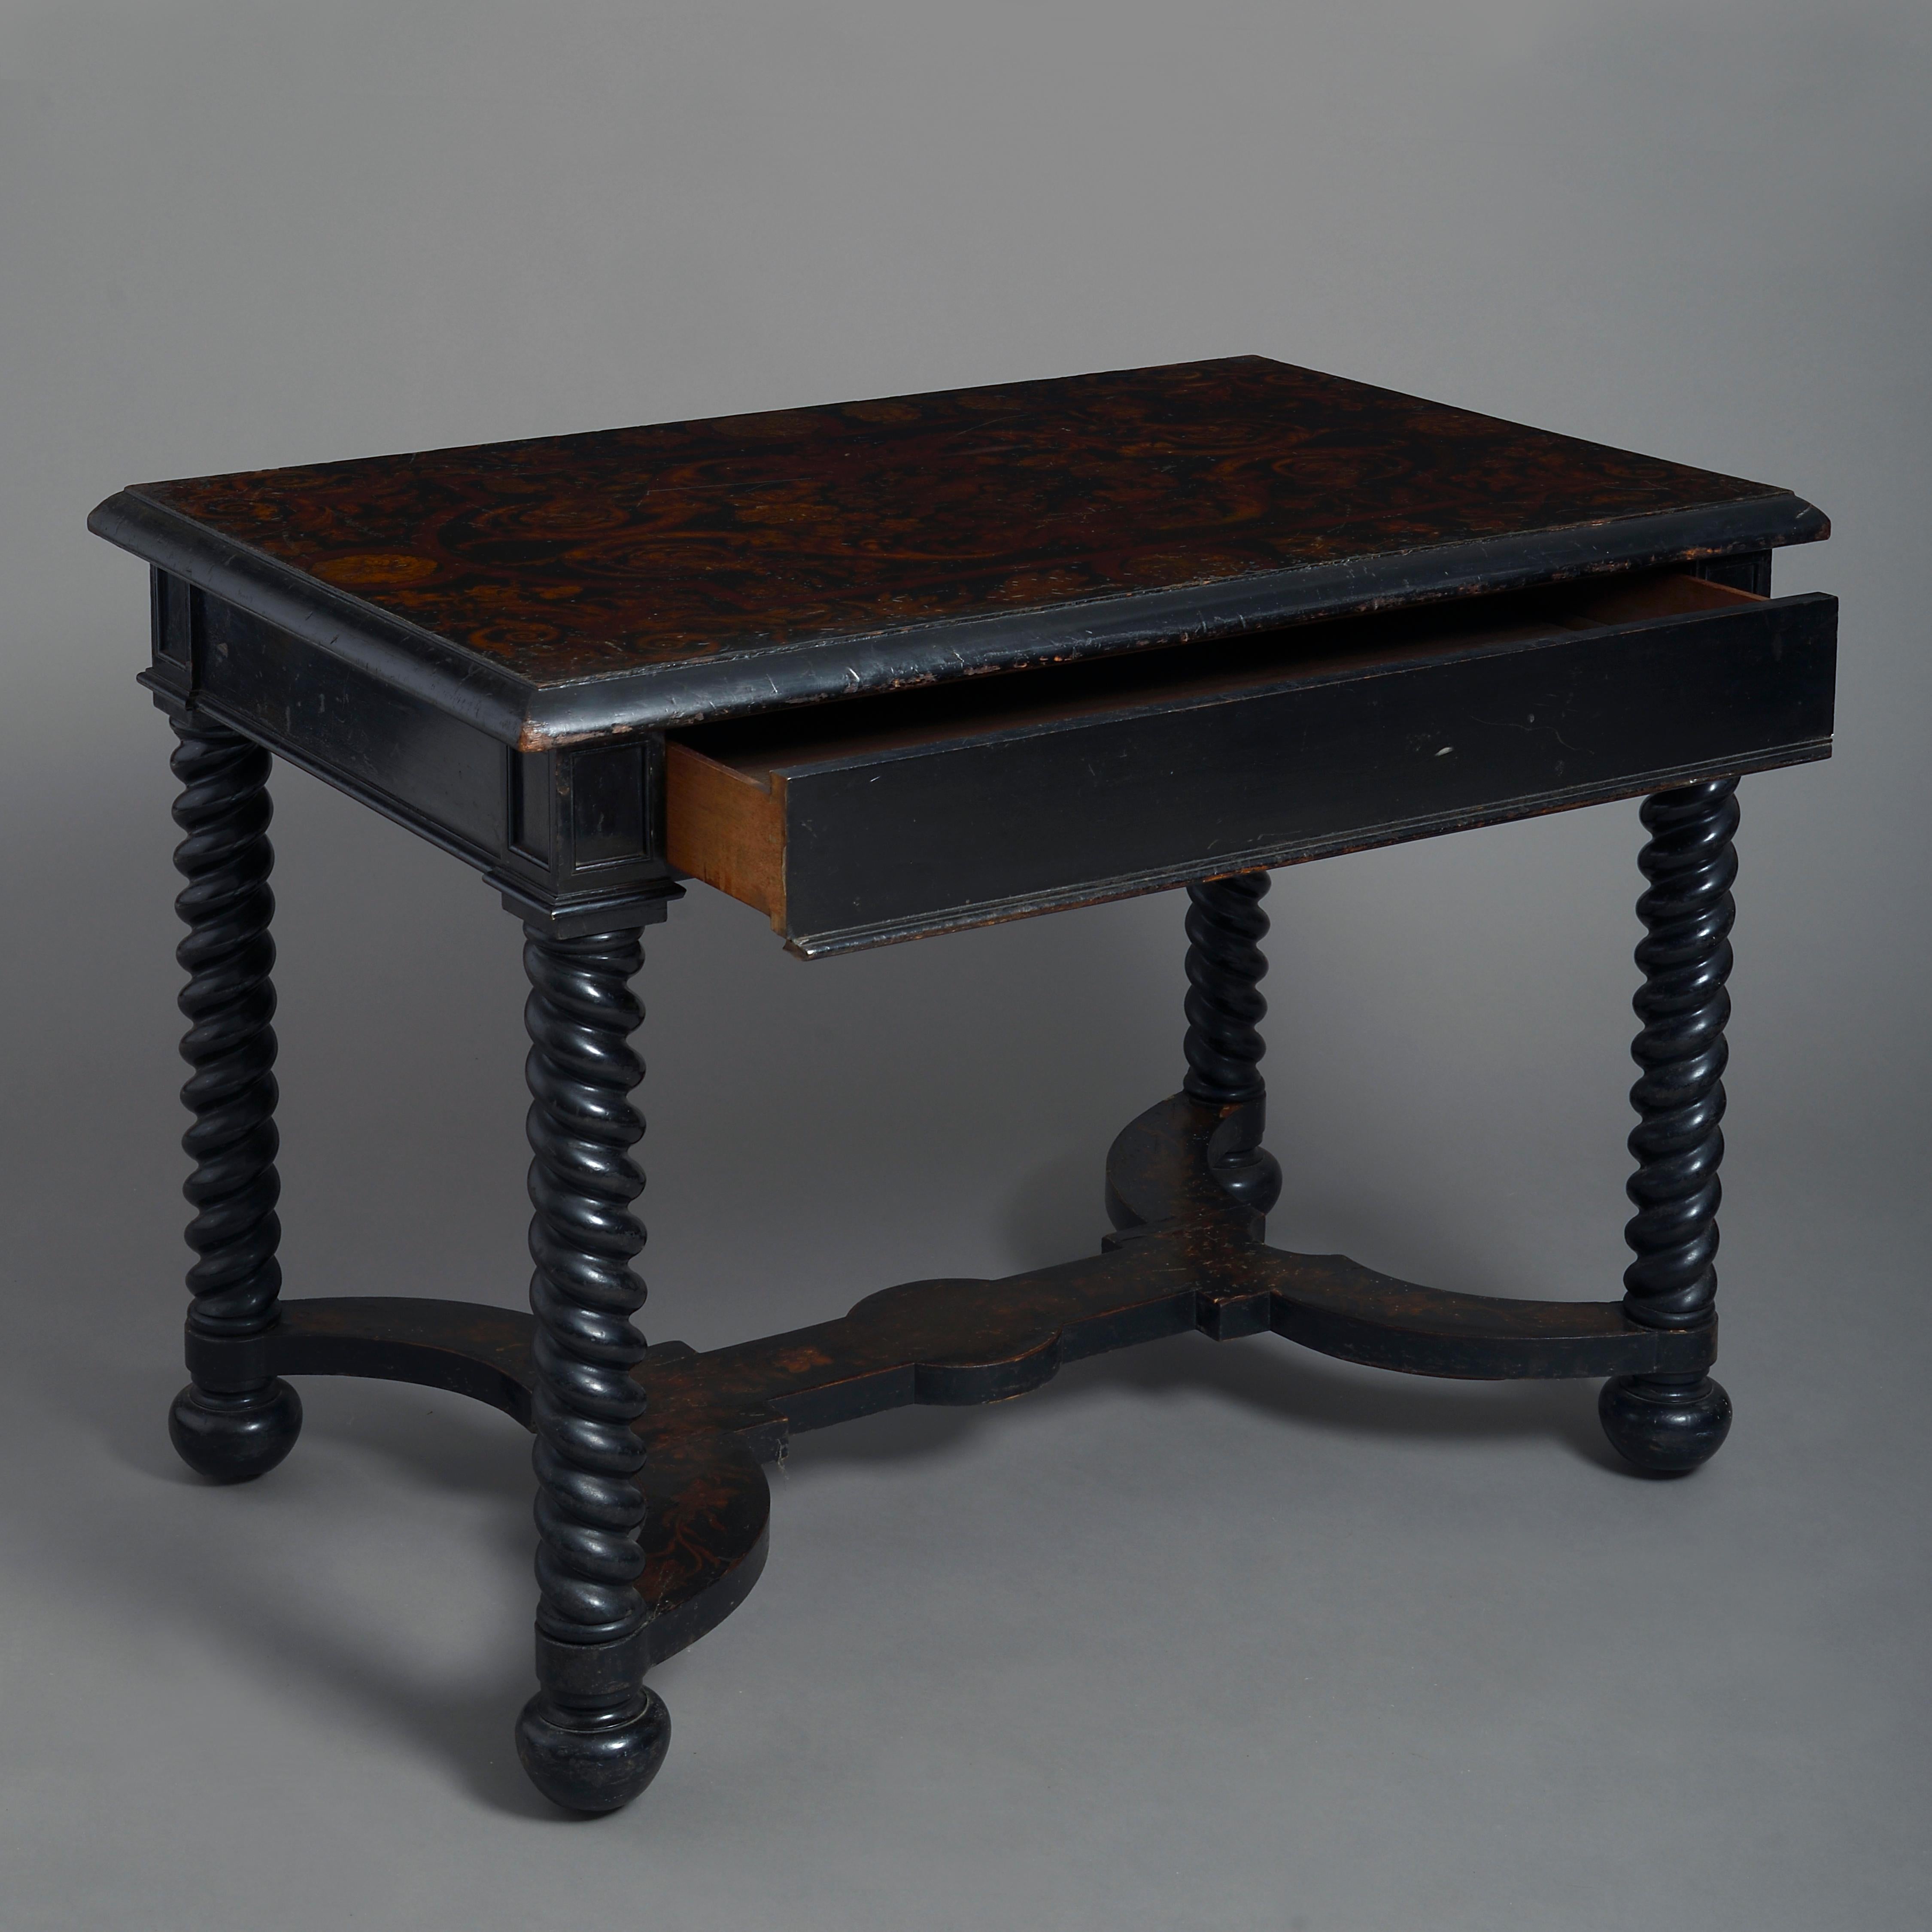 A fine early 19th century ebonized centre table in the 17th century manner, having a faux marquetry rectangular top, with central drawer and raised upon barley twist legs with conjoined decorated stretcher.